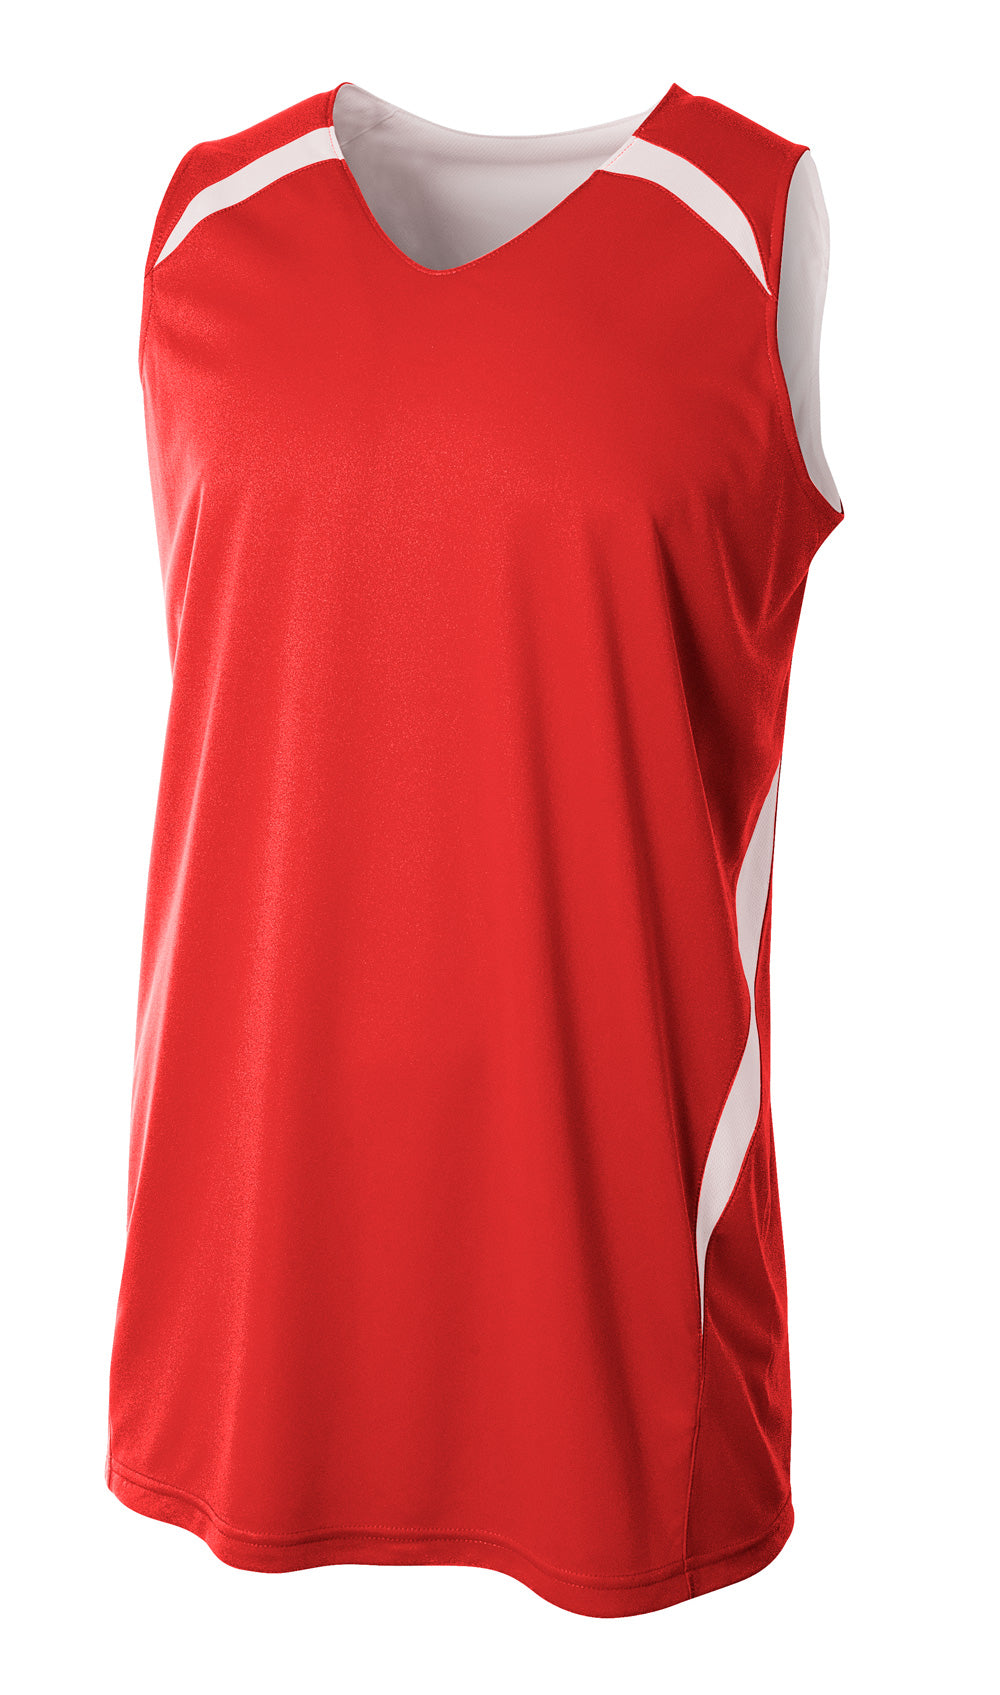 Scarlet/white A4 Double Double Jersey